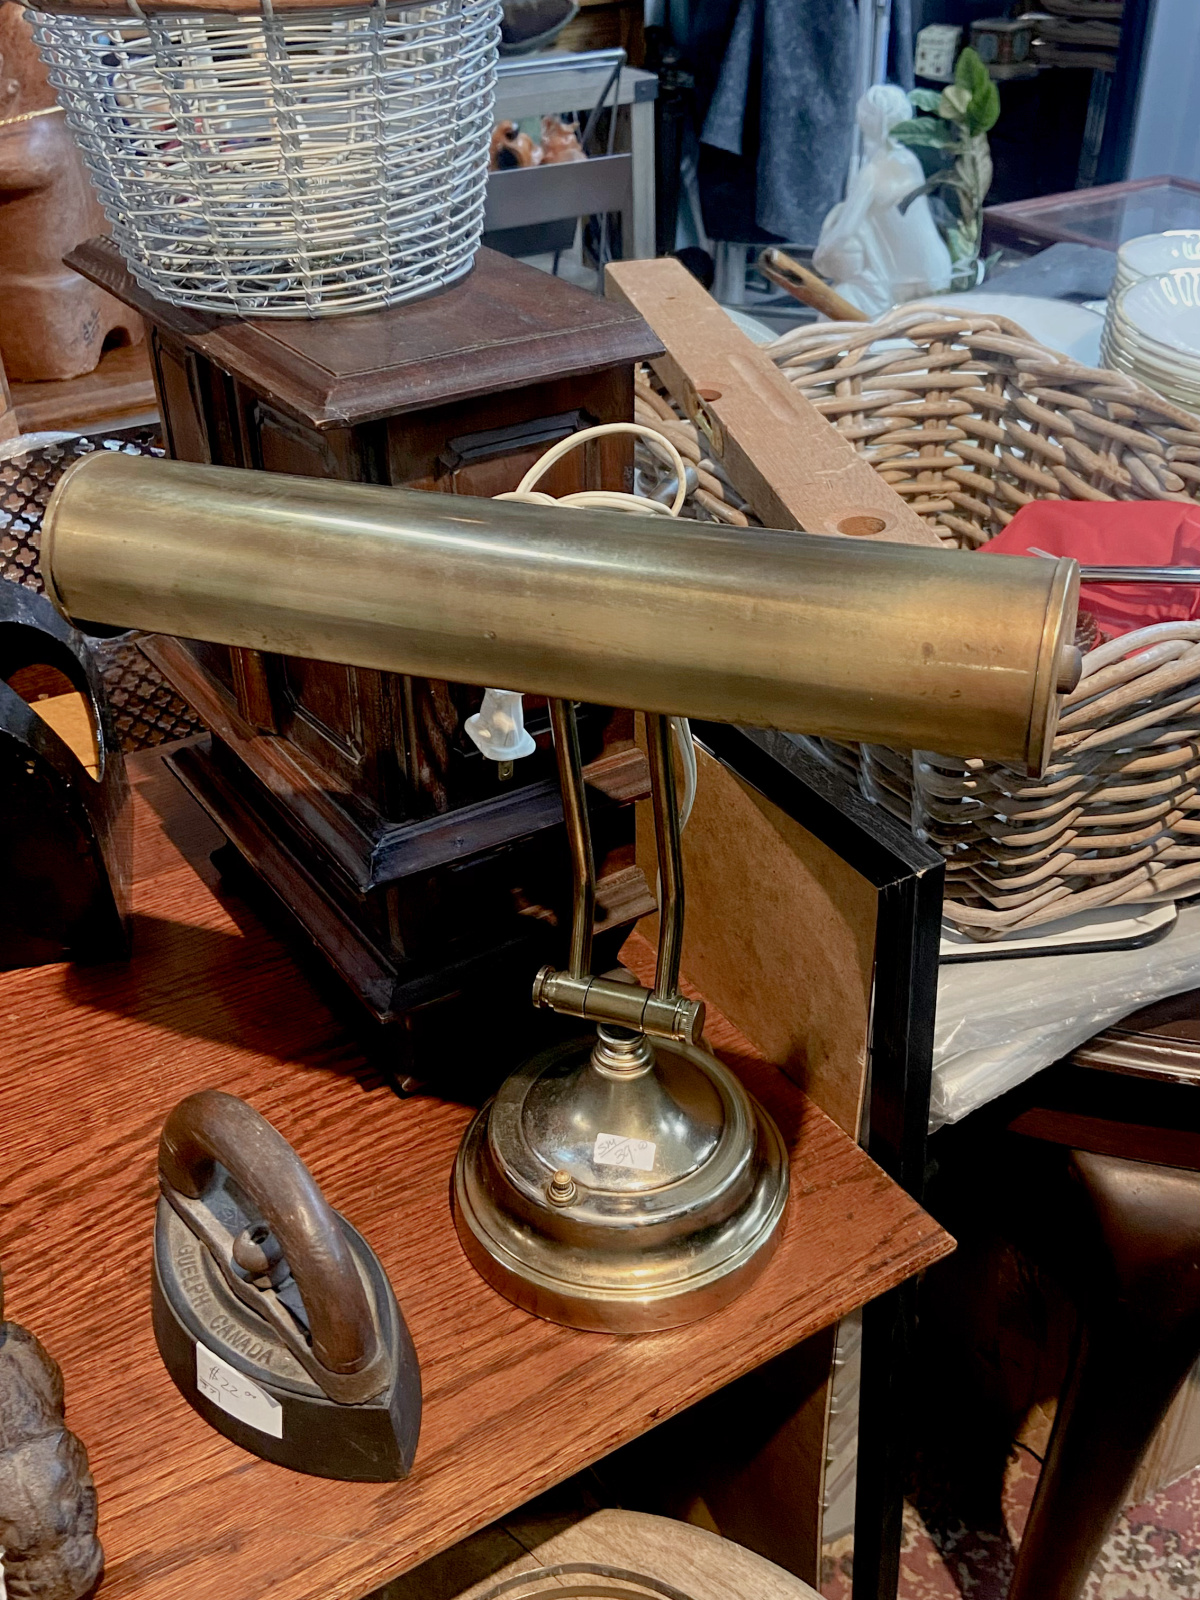 A vintage brass at surrounded by other antique items.